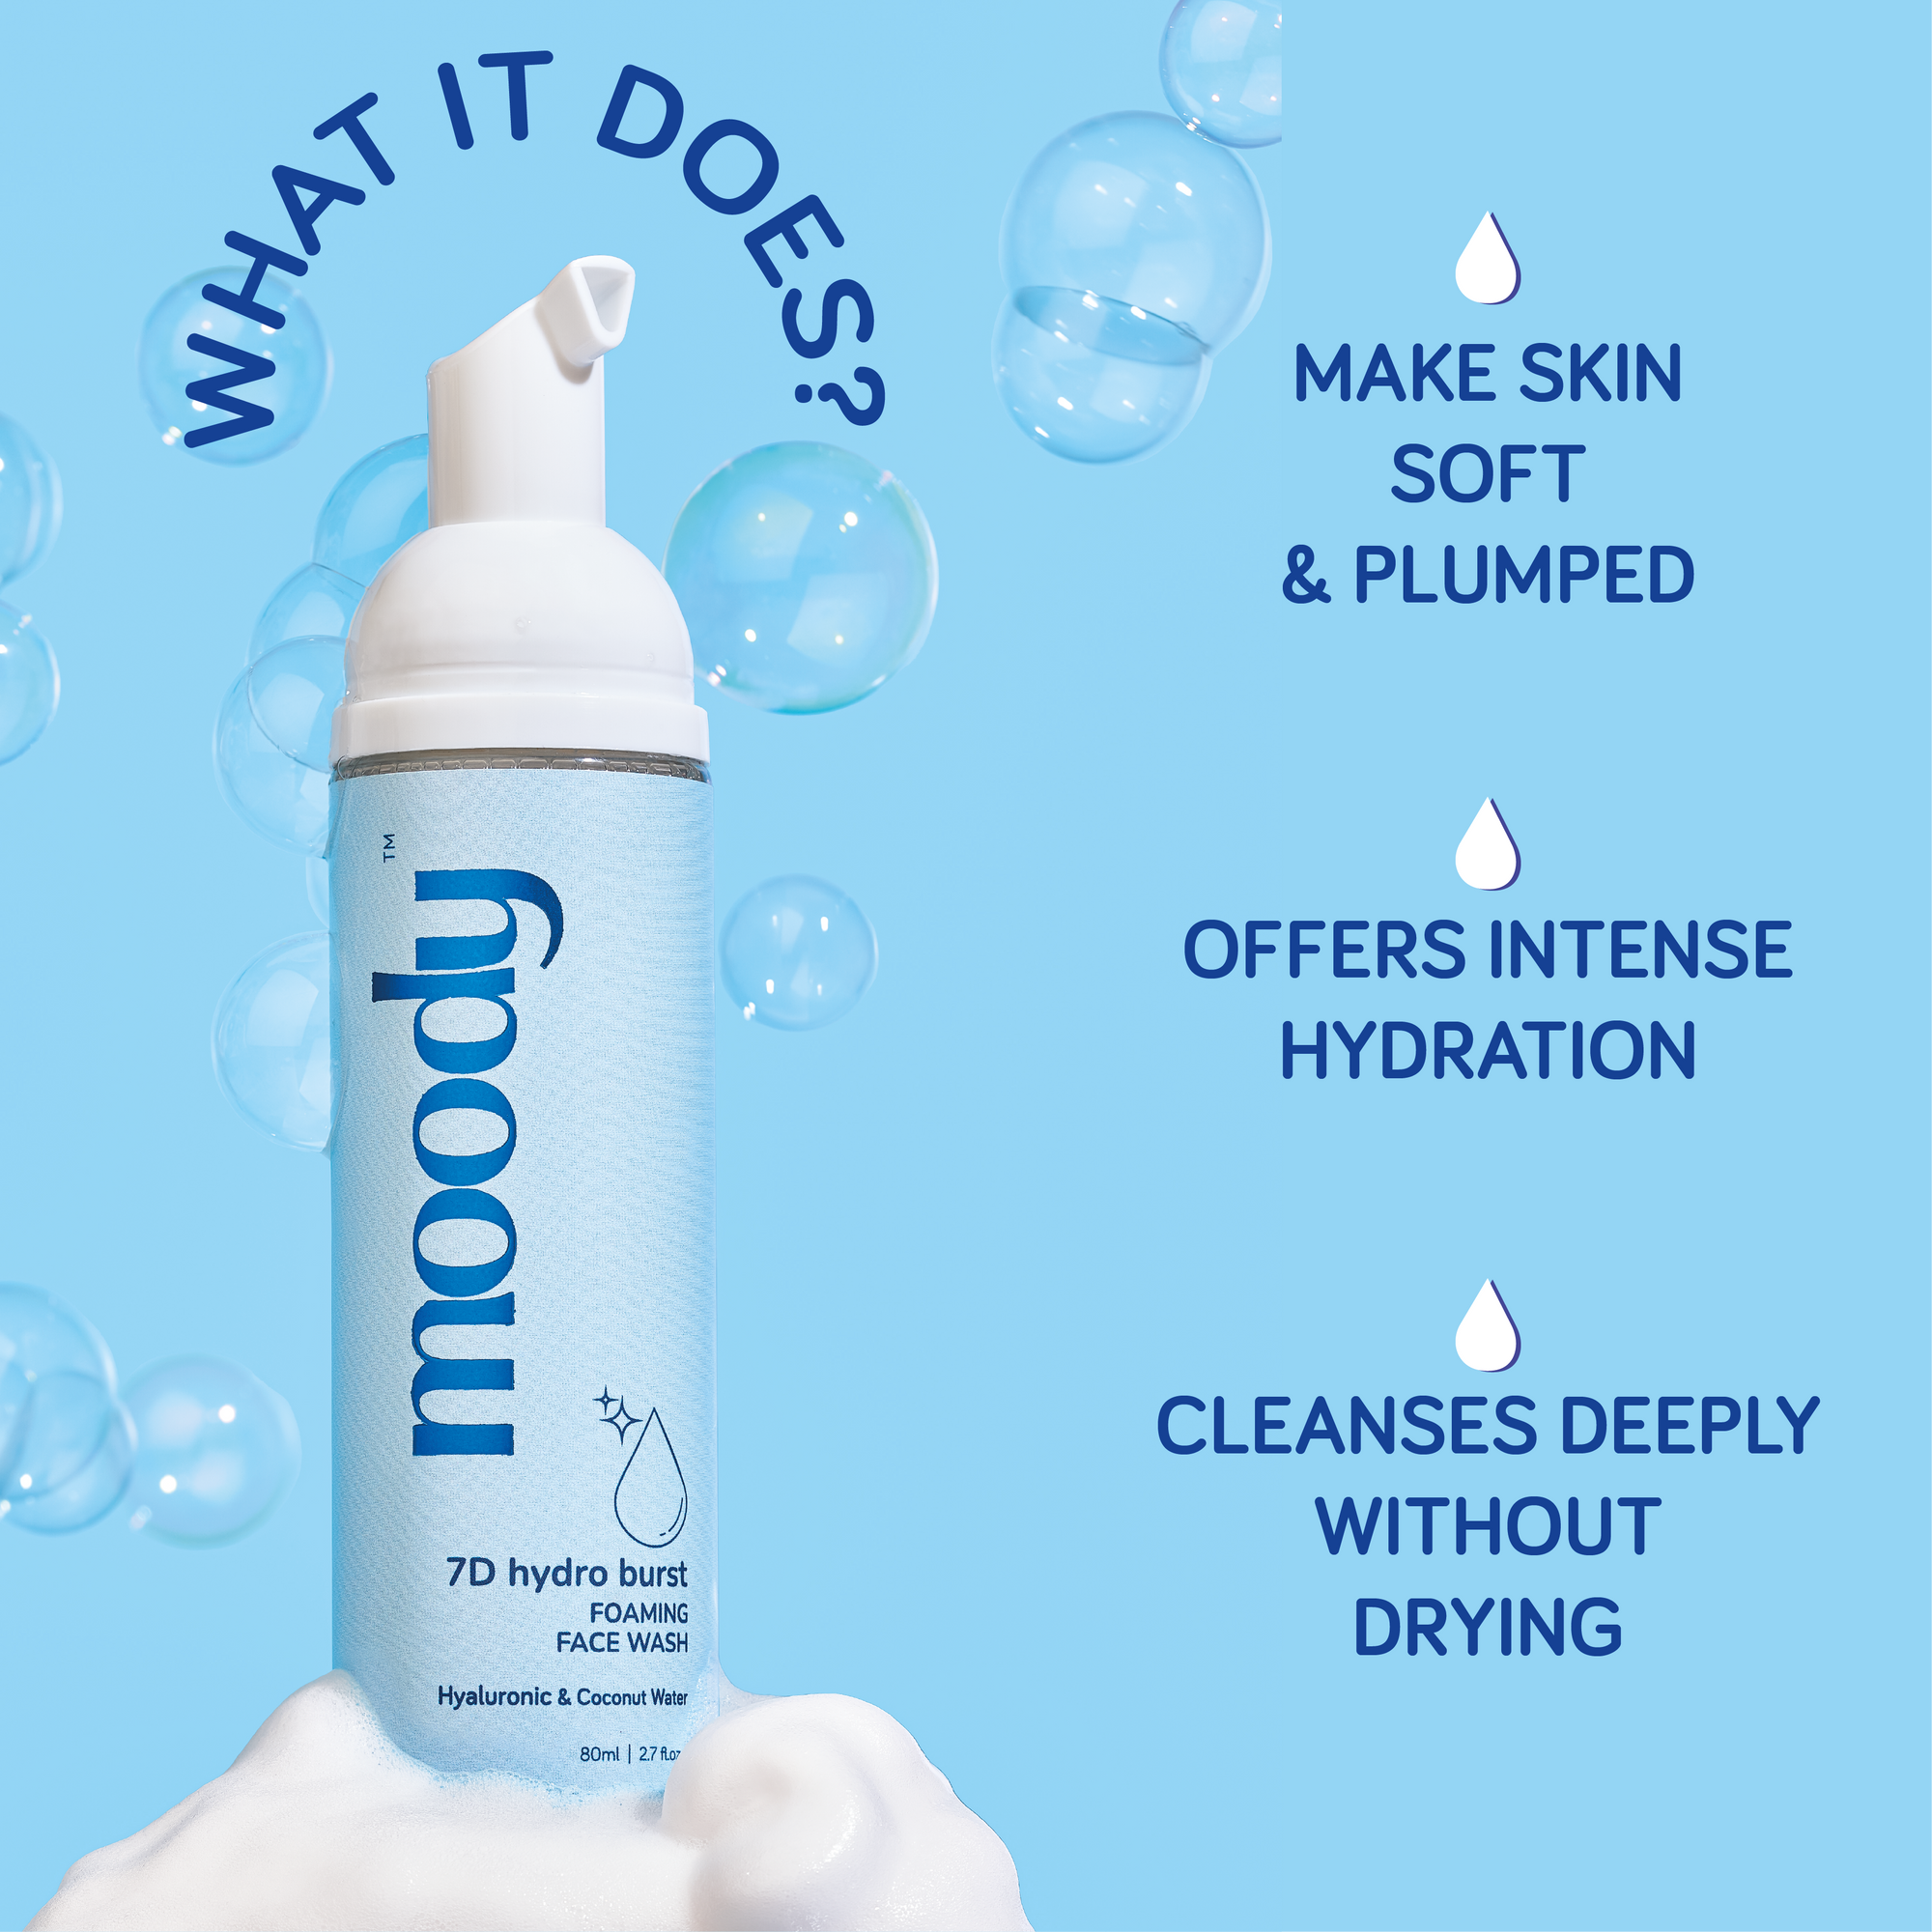 Hydro Burst Foaming Face Wash with 2% Hyaluronic Acid